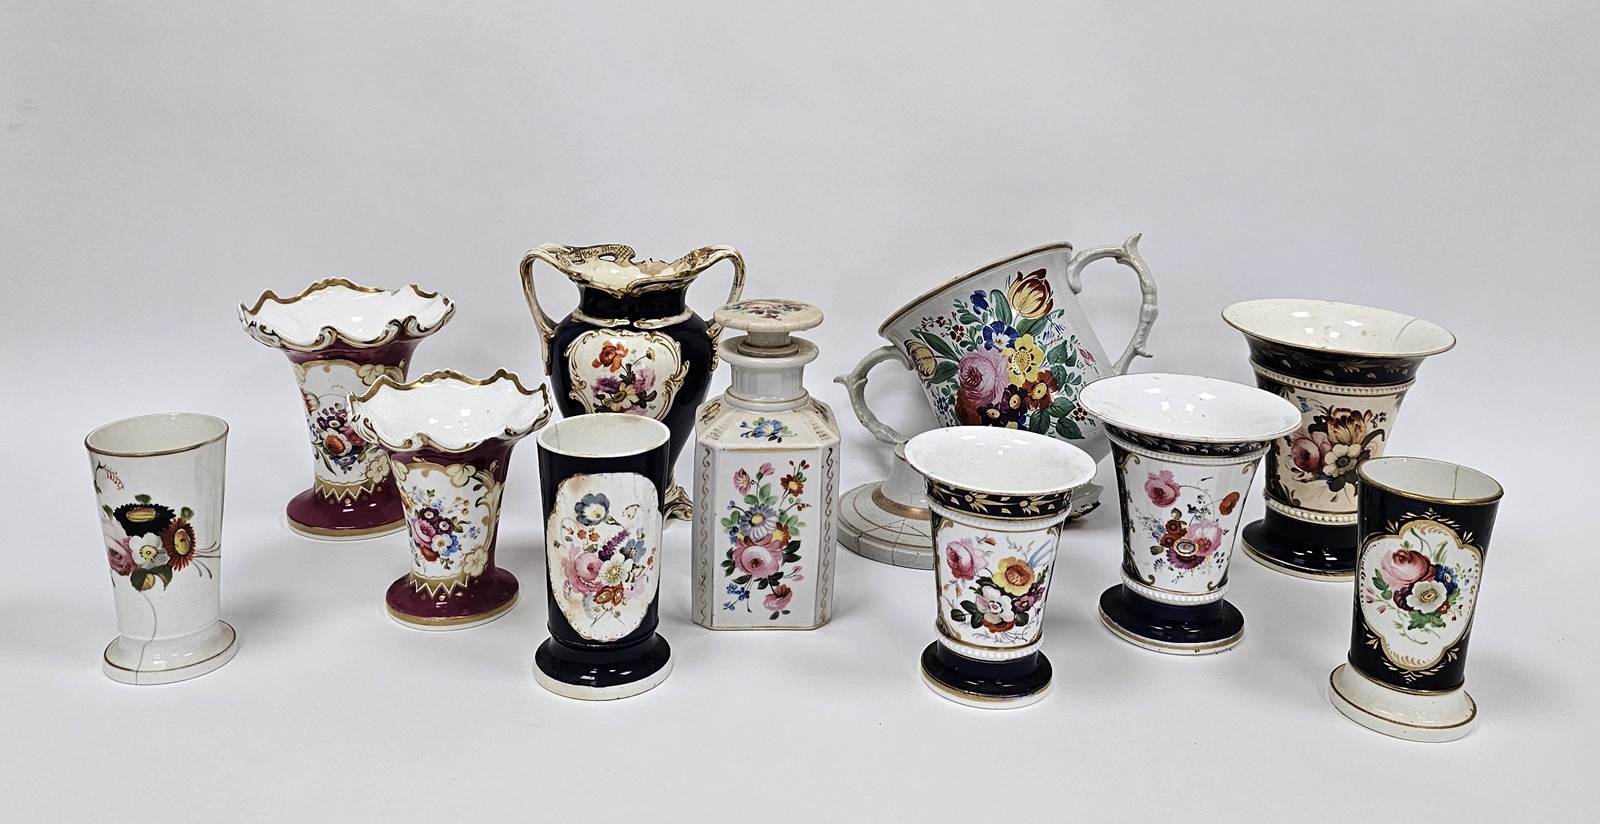 Collection of 19th century English porcelain vases, a pearlware two-handled named loving cup named